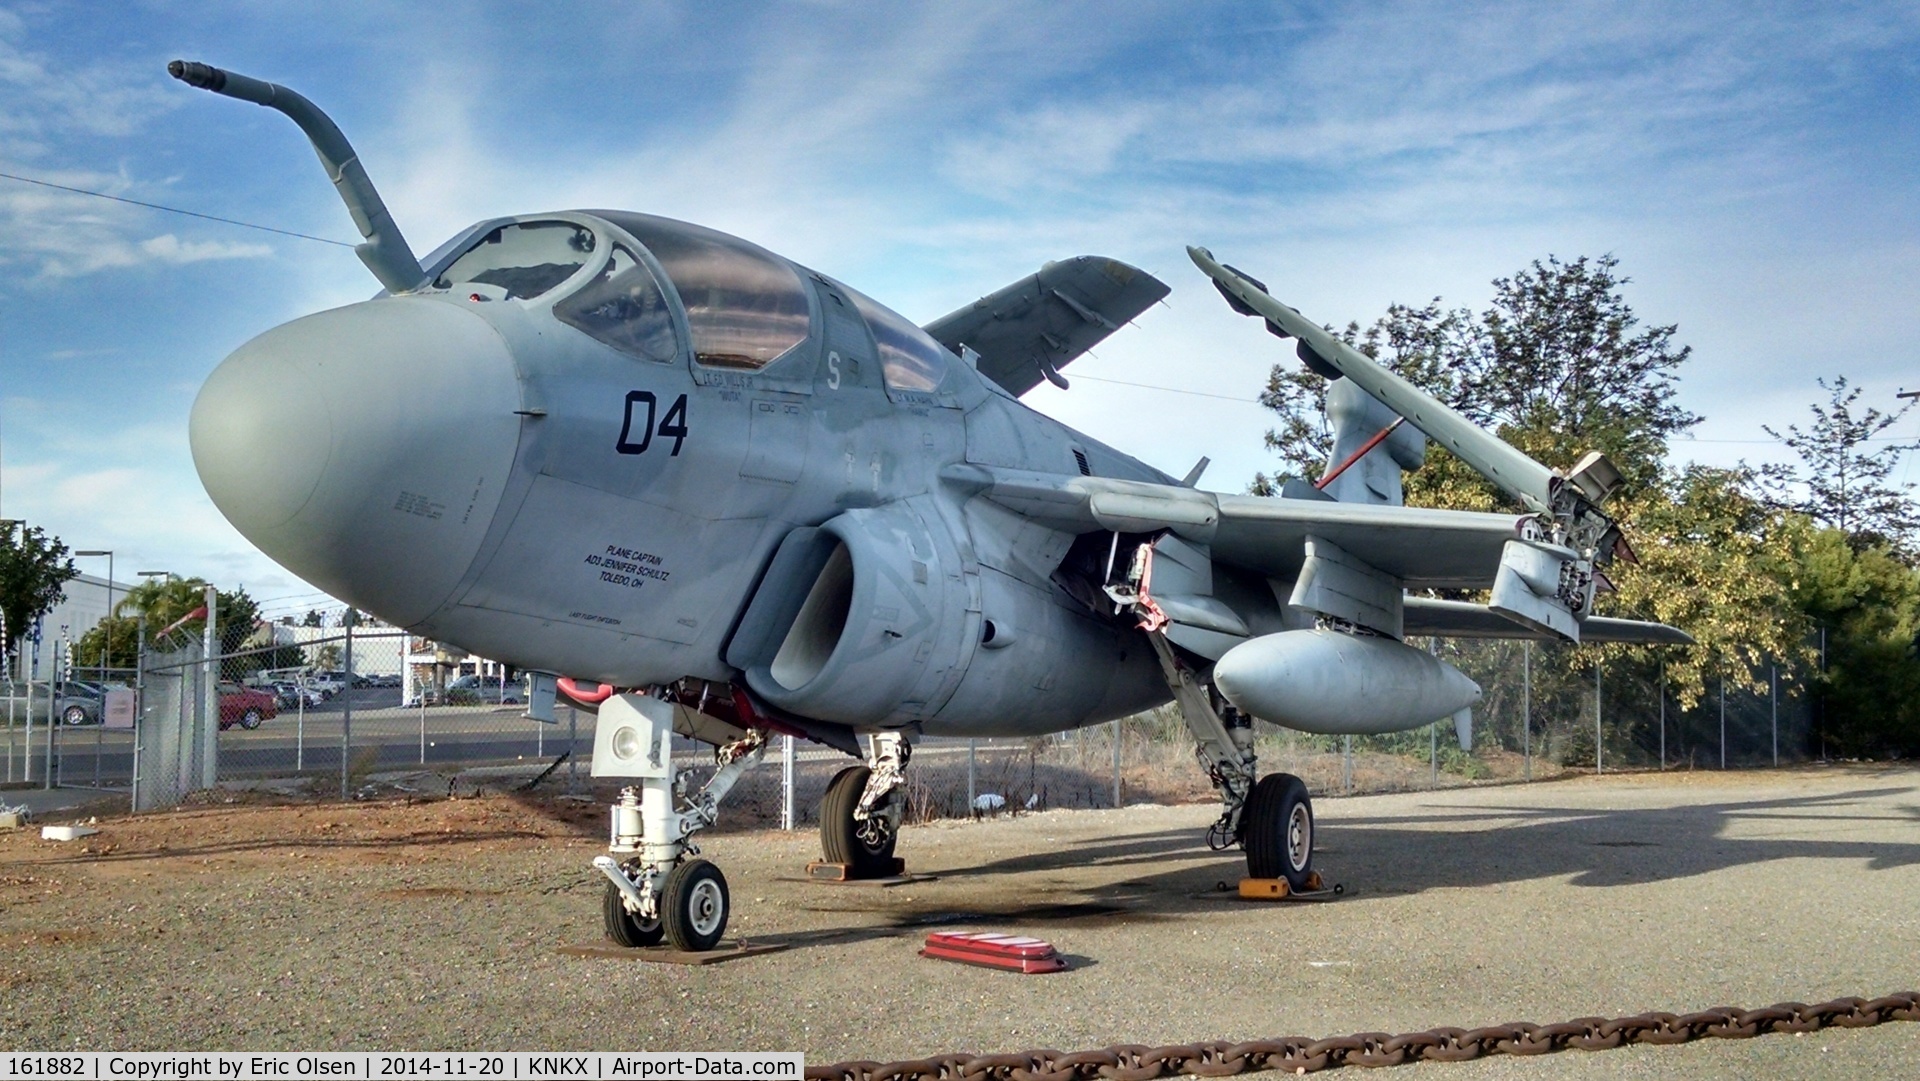 161882, Grumman EA-6B Prowler C/N P-105, Grumman EA-6B BuNo 161882 at the Flying Leatherneck Museum at Miramar. They acquired this example in Feb of 2014 from VAQ 131 